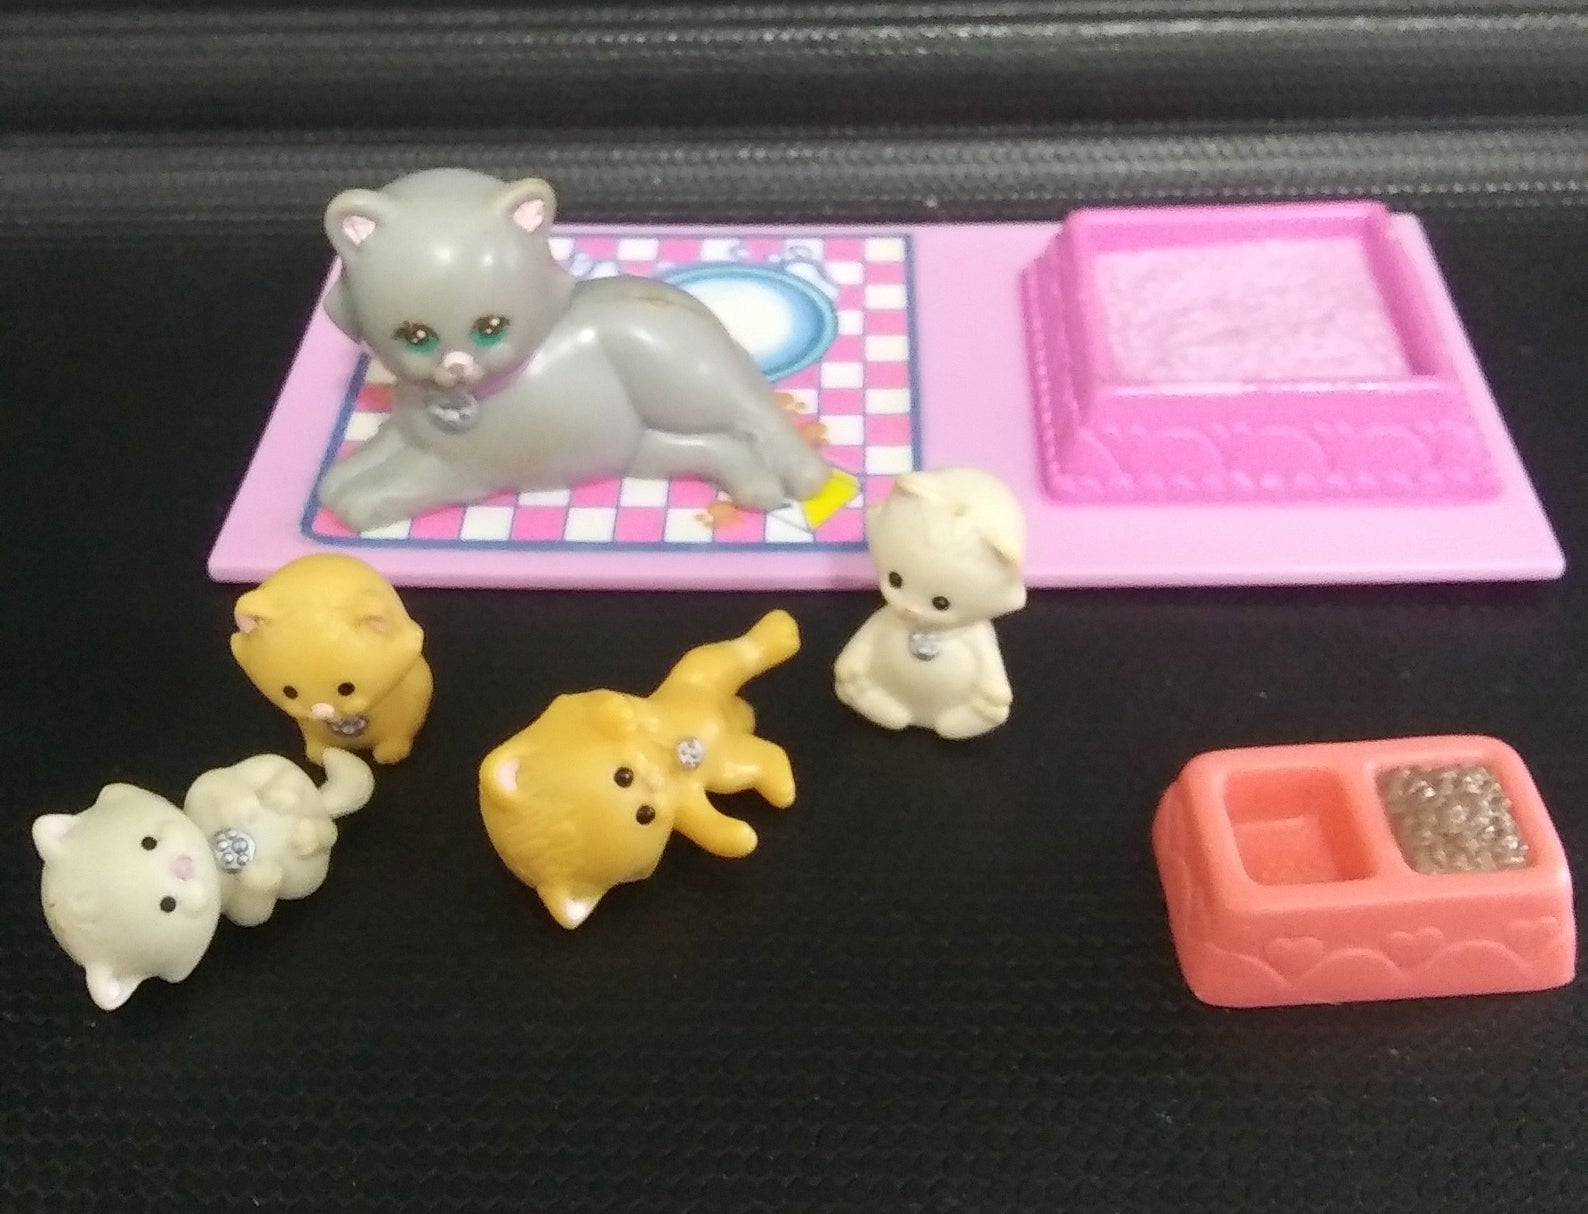 Littlest Pet Shop Animal Pink Cloth White Cat Kitty Figure Doll Child Toy 